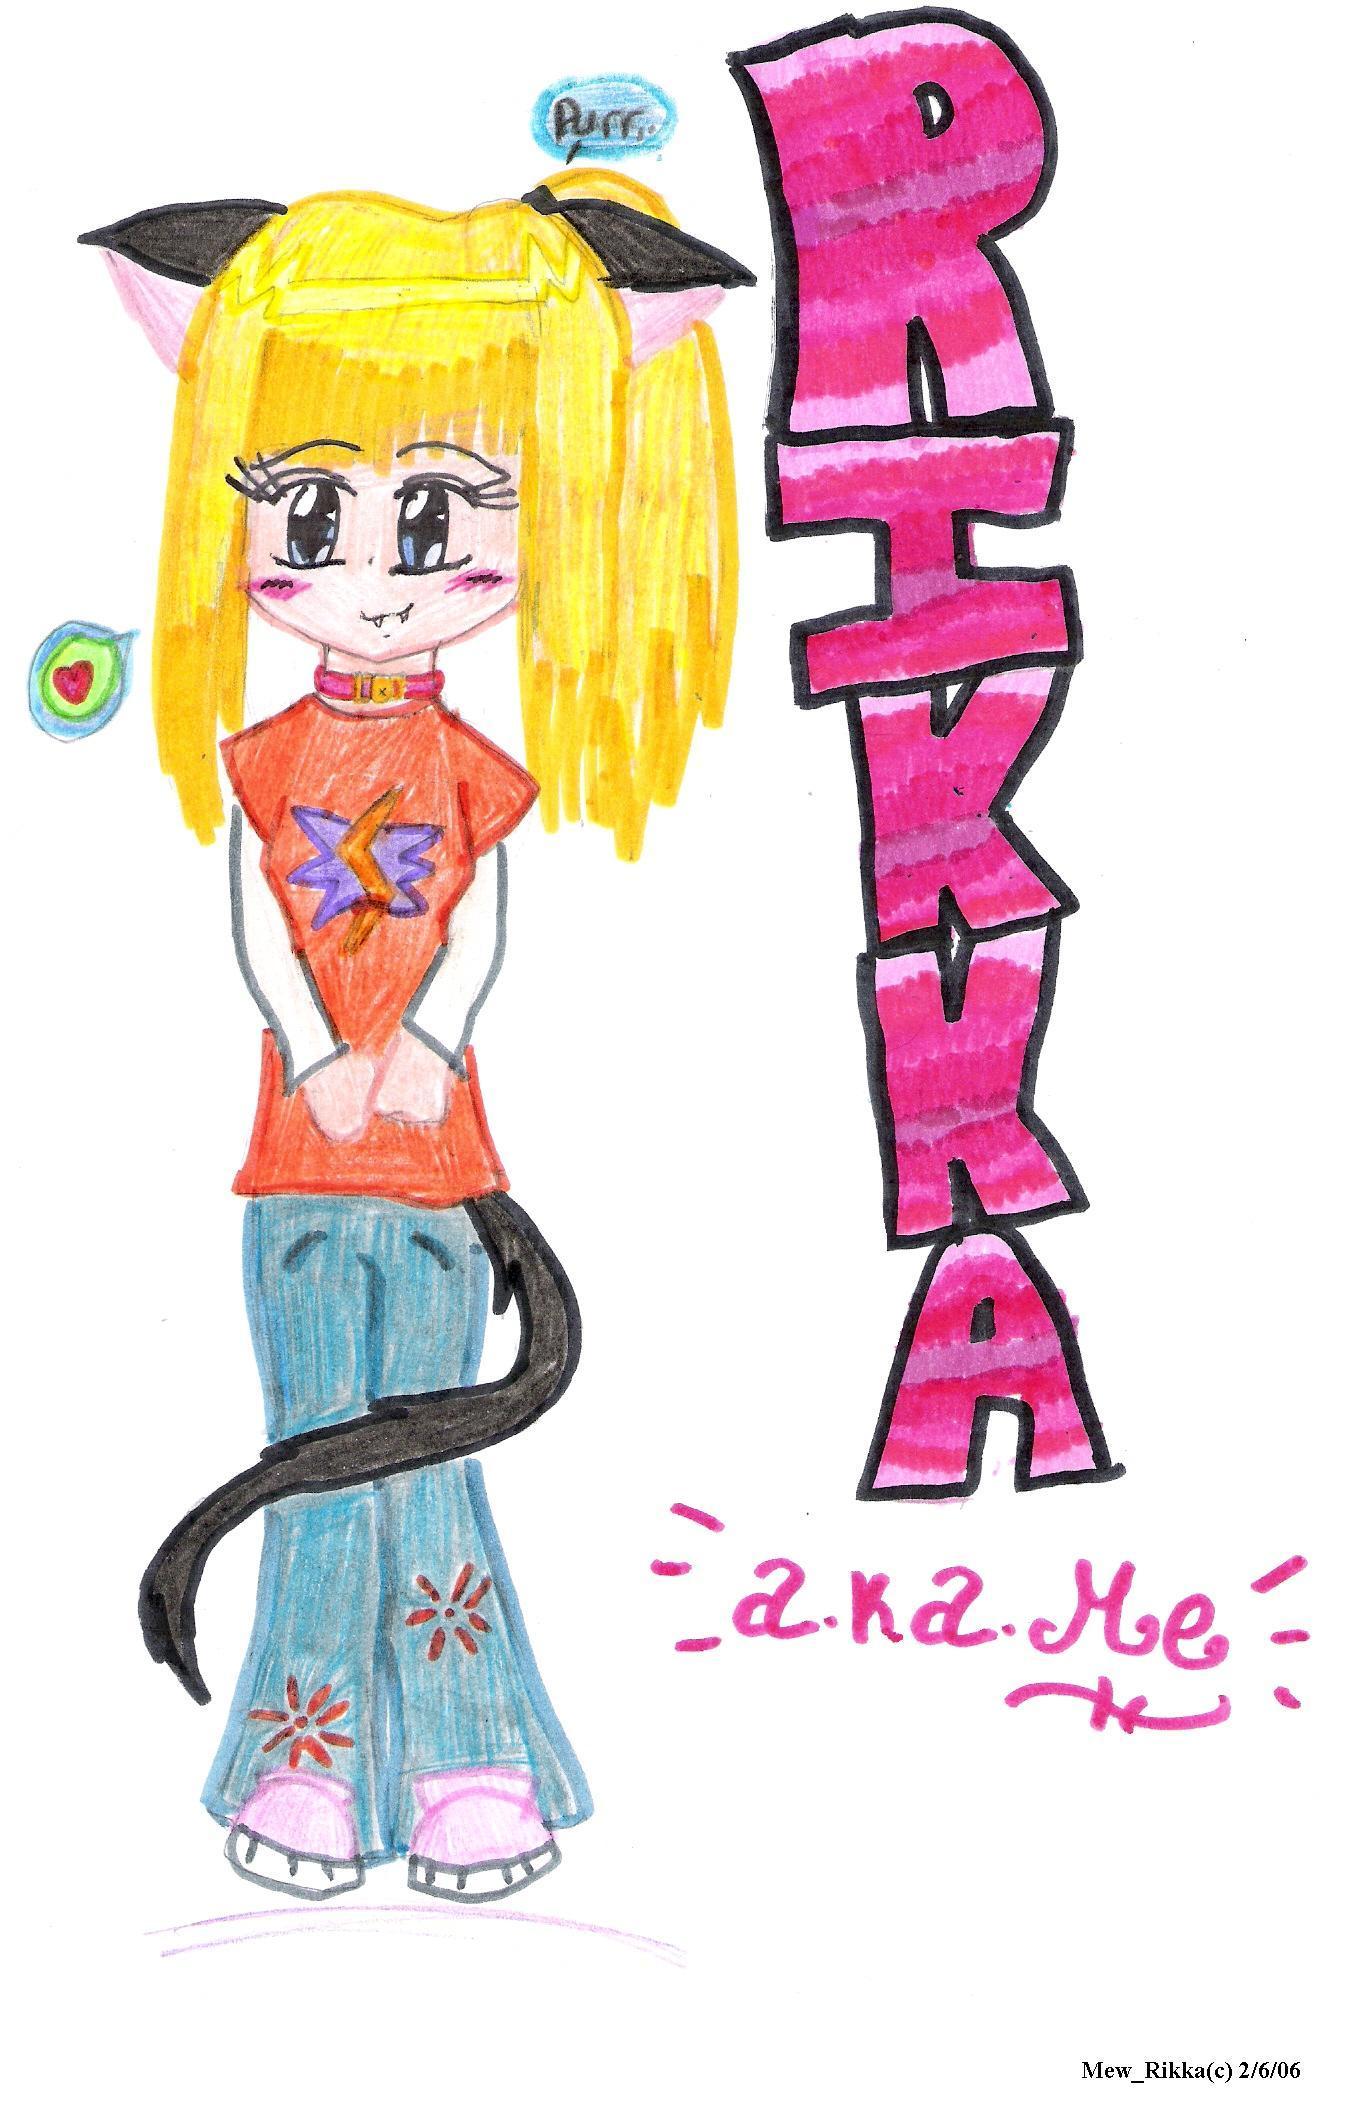 Me in anime by Mew_Rikka